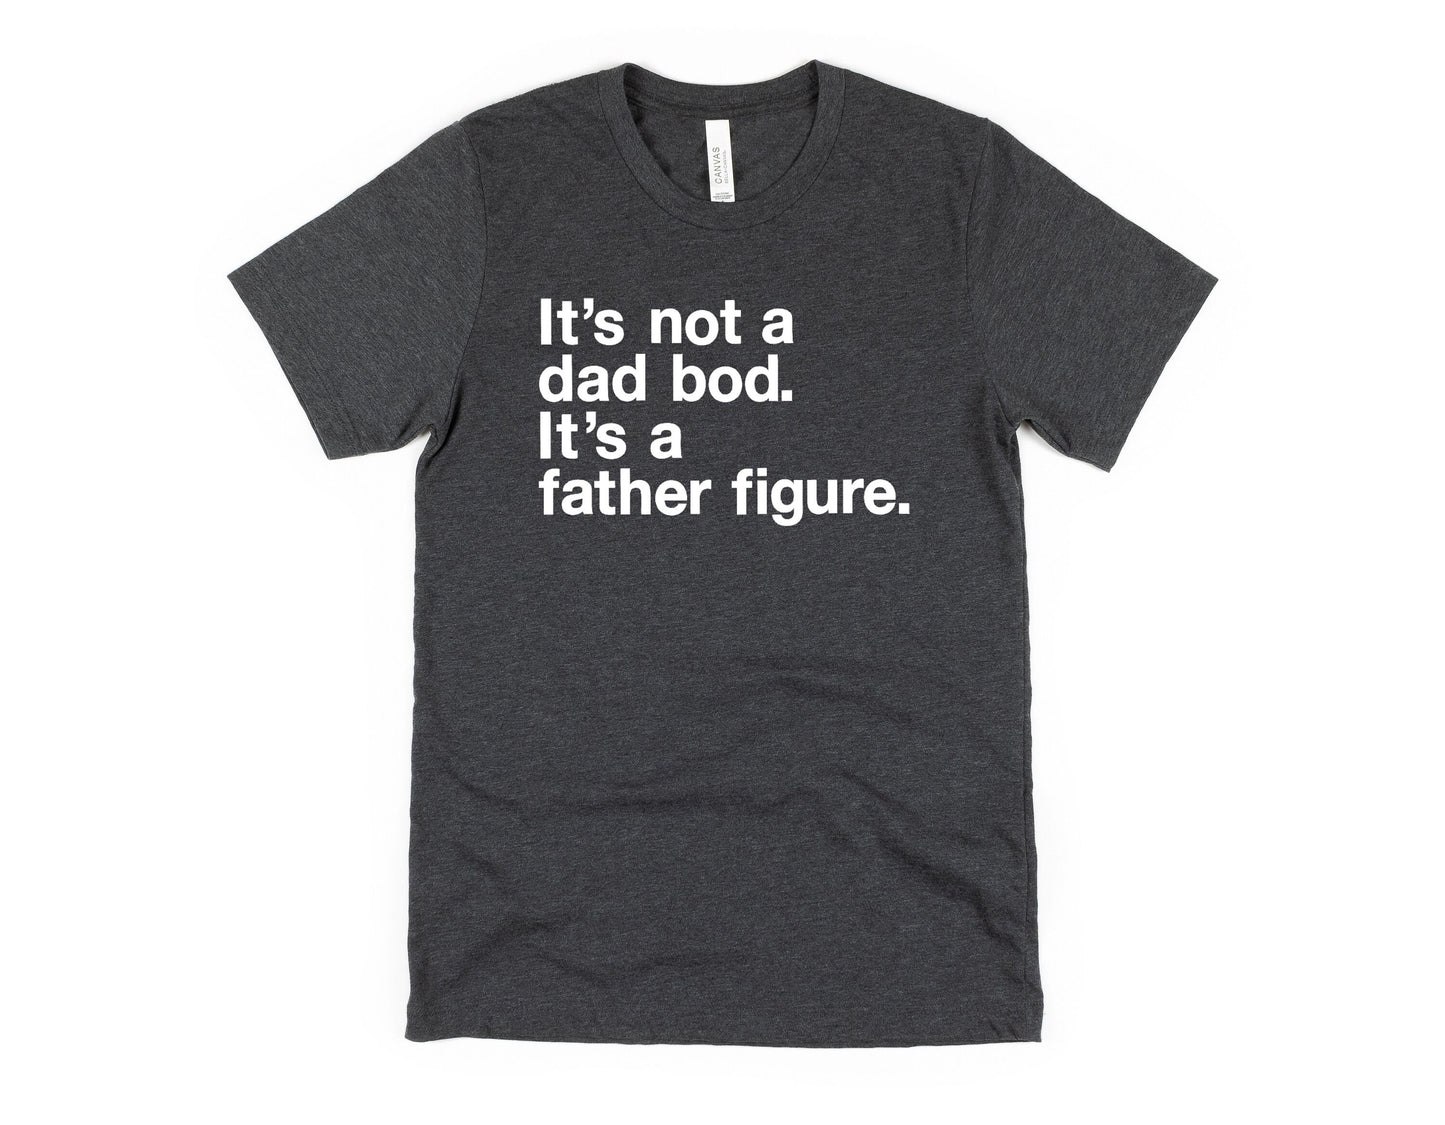 Not a Dad Bod Shirt - Father's Day Shirt - Dad Joke Shirt - Gifts for Dad - Dad Birthday Gift - Dad Joke Shirt - Father Figure